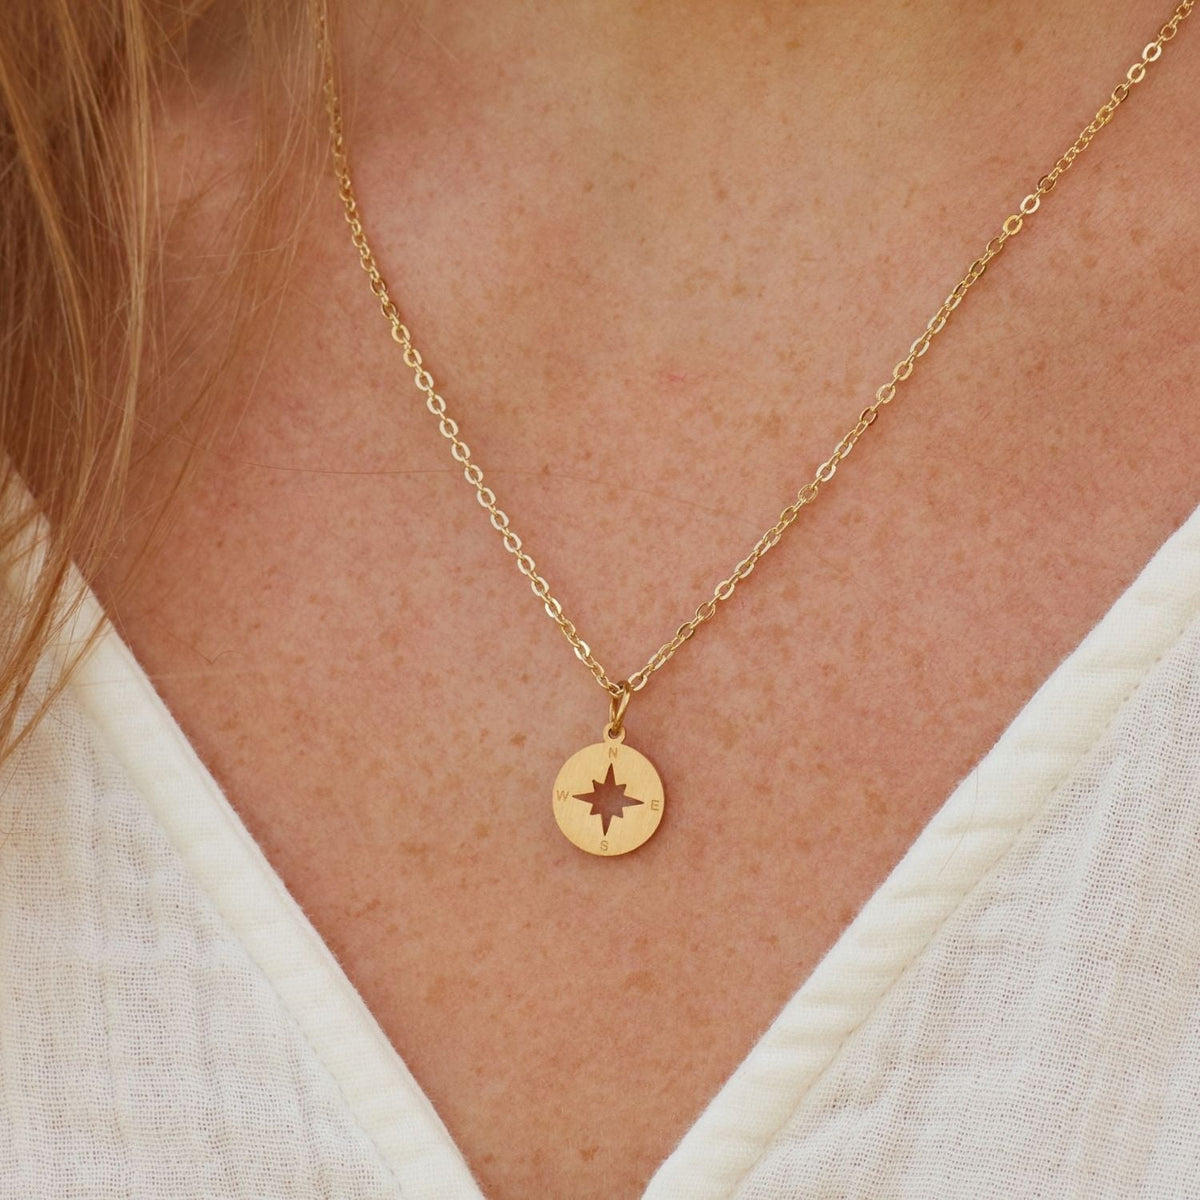 To My Beautiful Daughter | Peace of Jesus | Compass Necklace